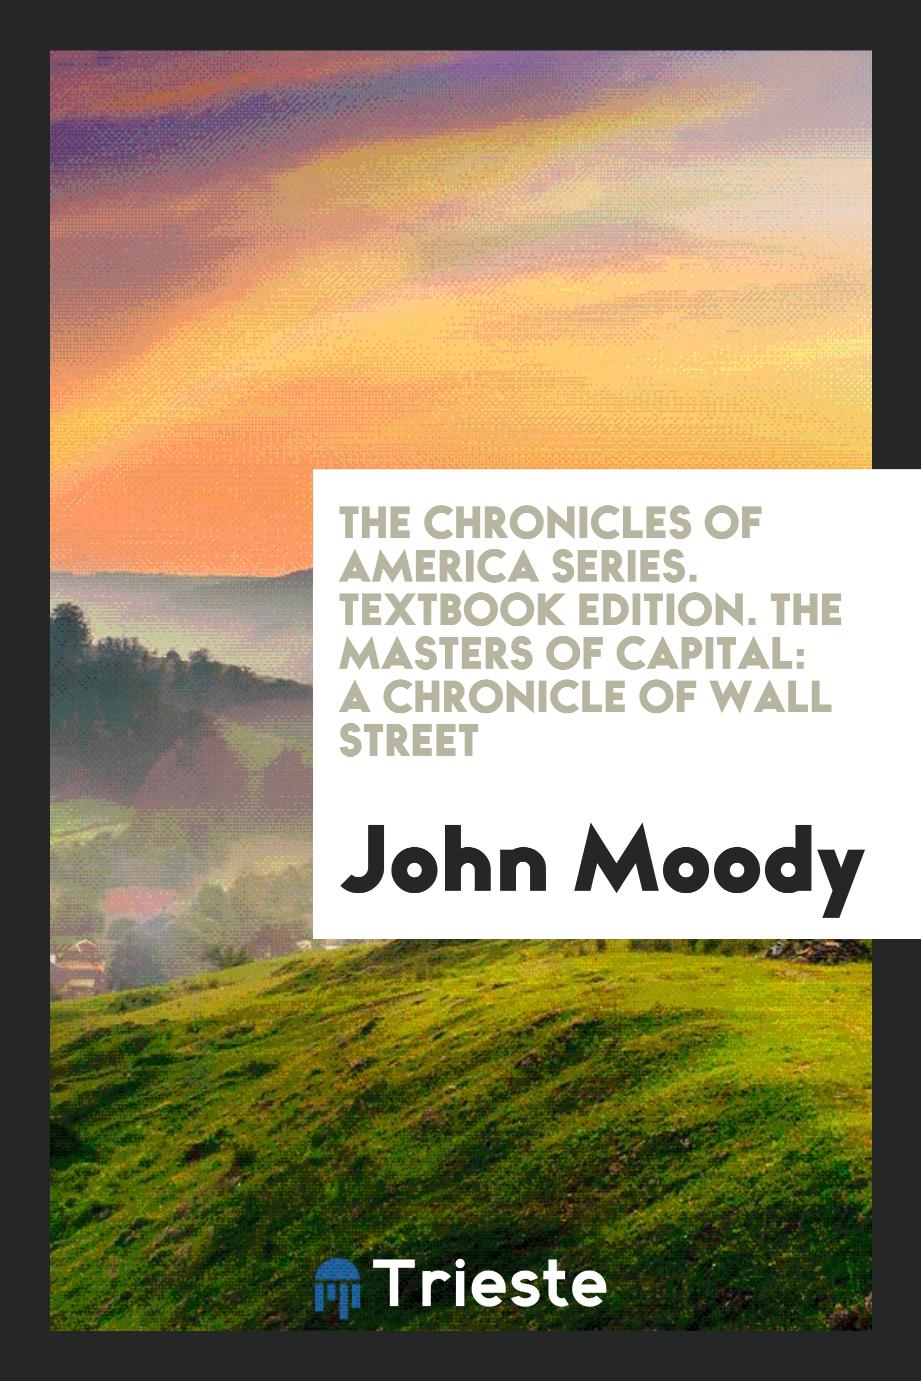 The Chronicles of America Series. Textbook Edition. The Masters of Capital: A Chronicle of Wall Street